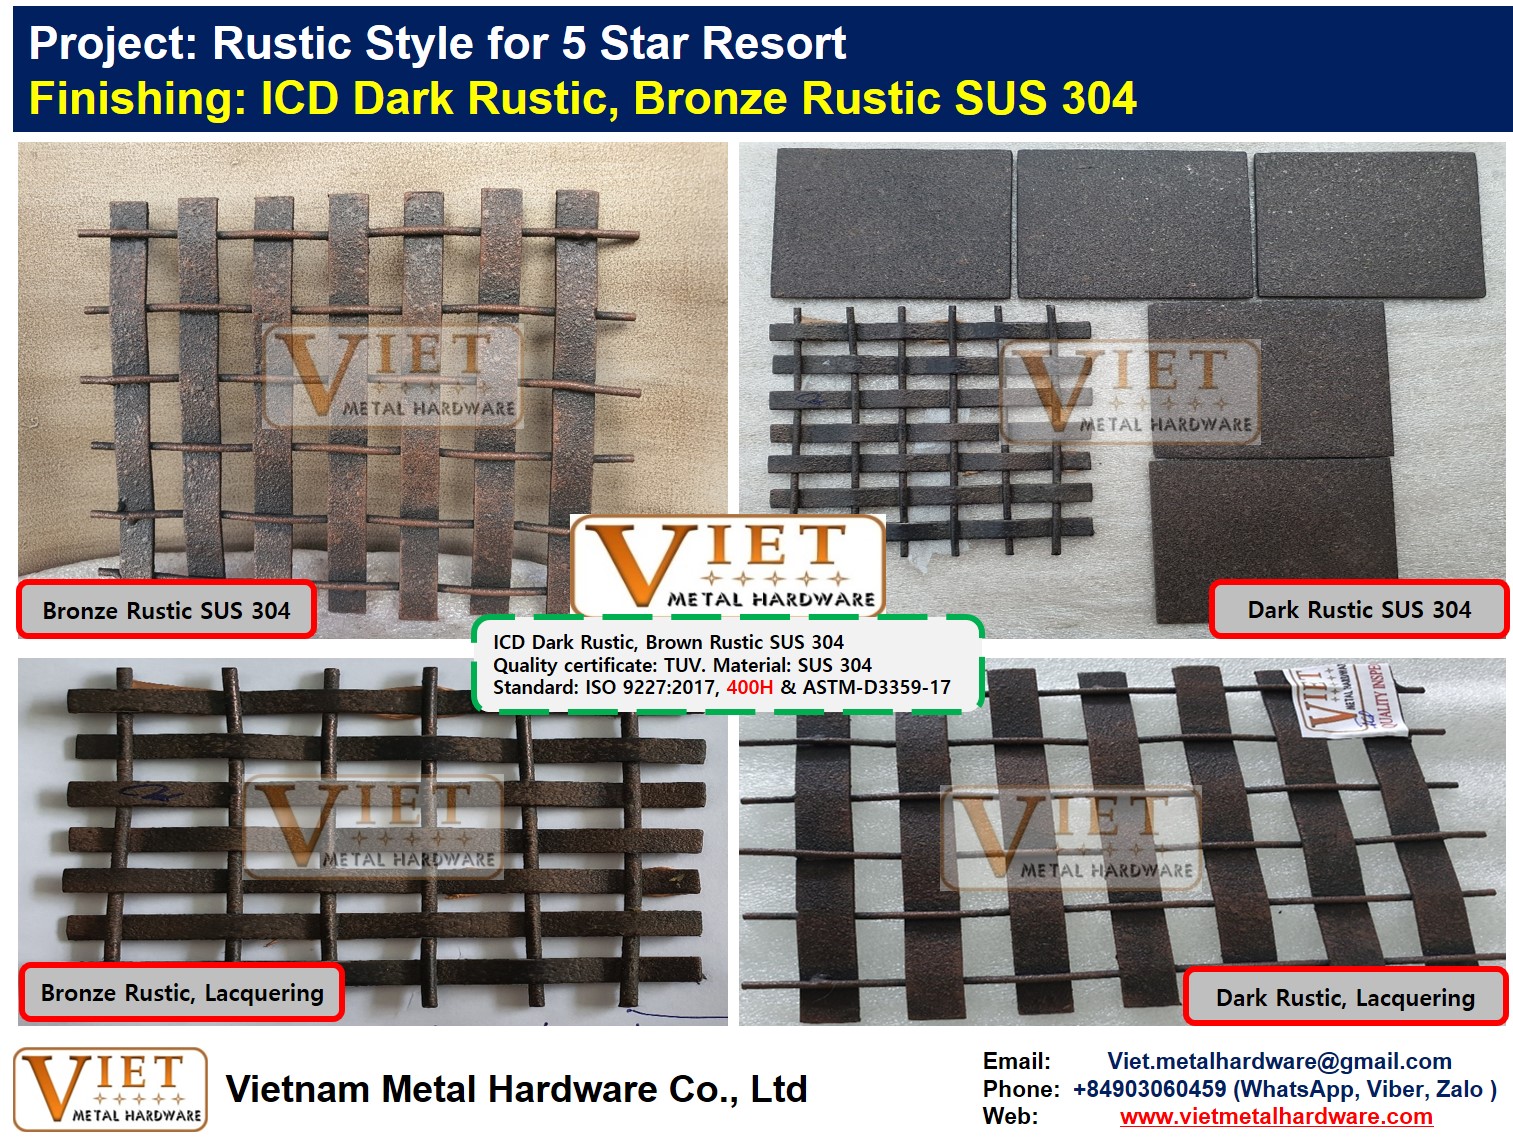 ICD Wire Mesh Rustic Style on SUS 304